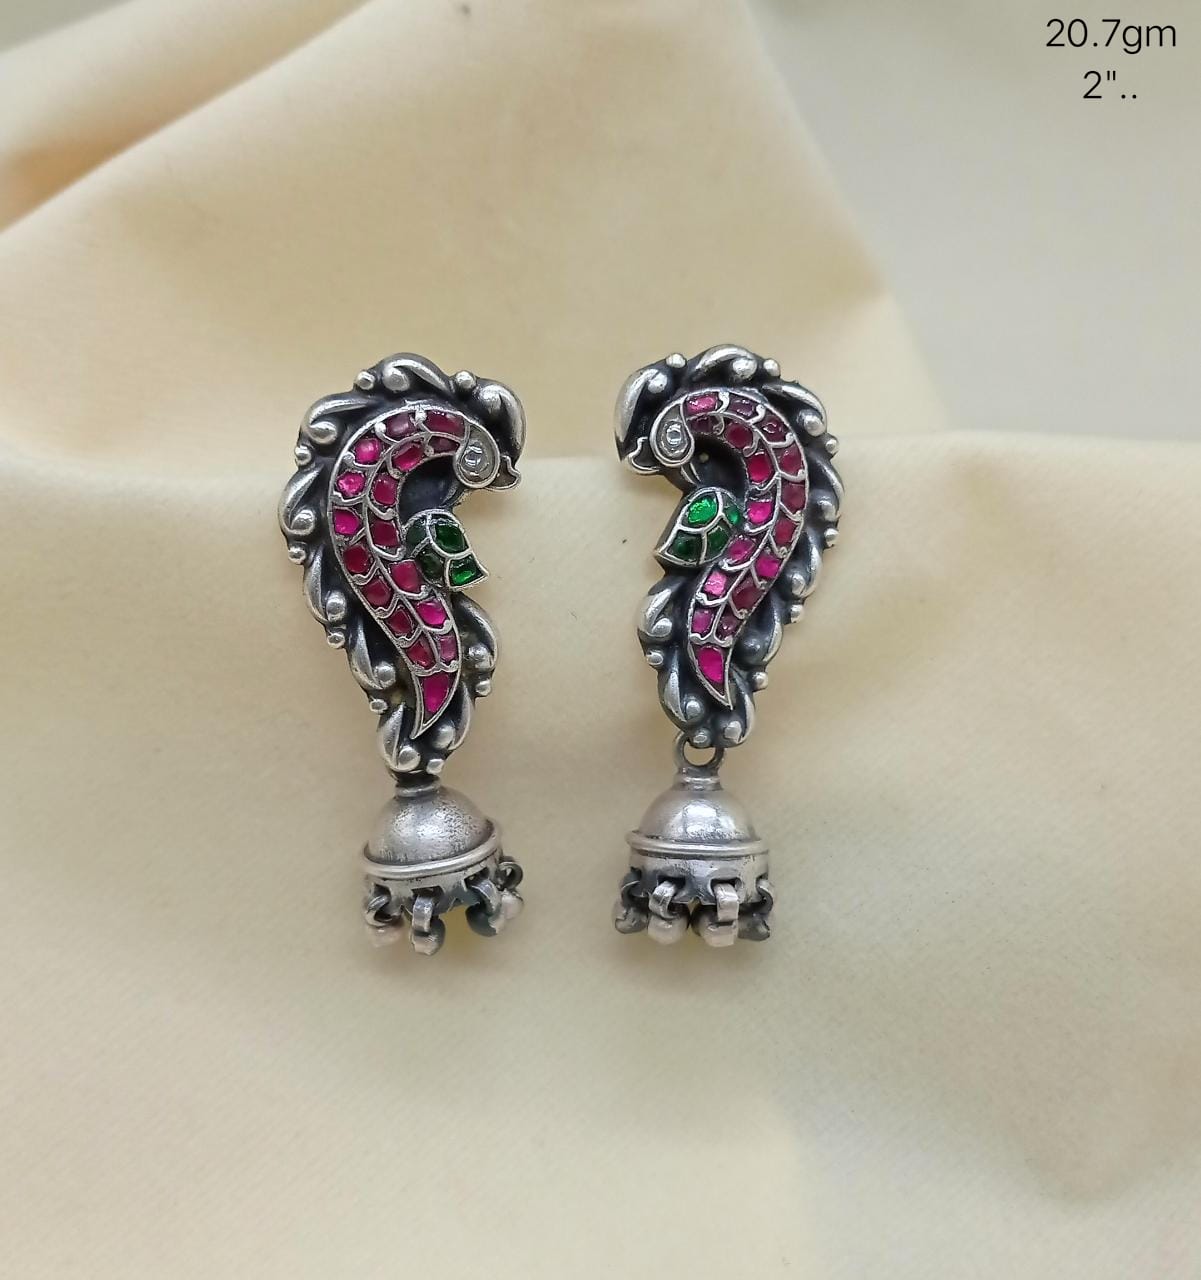 Exquisite Silver Earrings: Enhance Your Style with Sterling Silver Jewelry